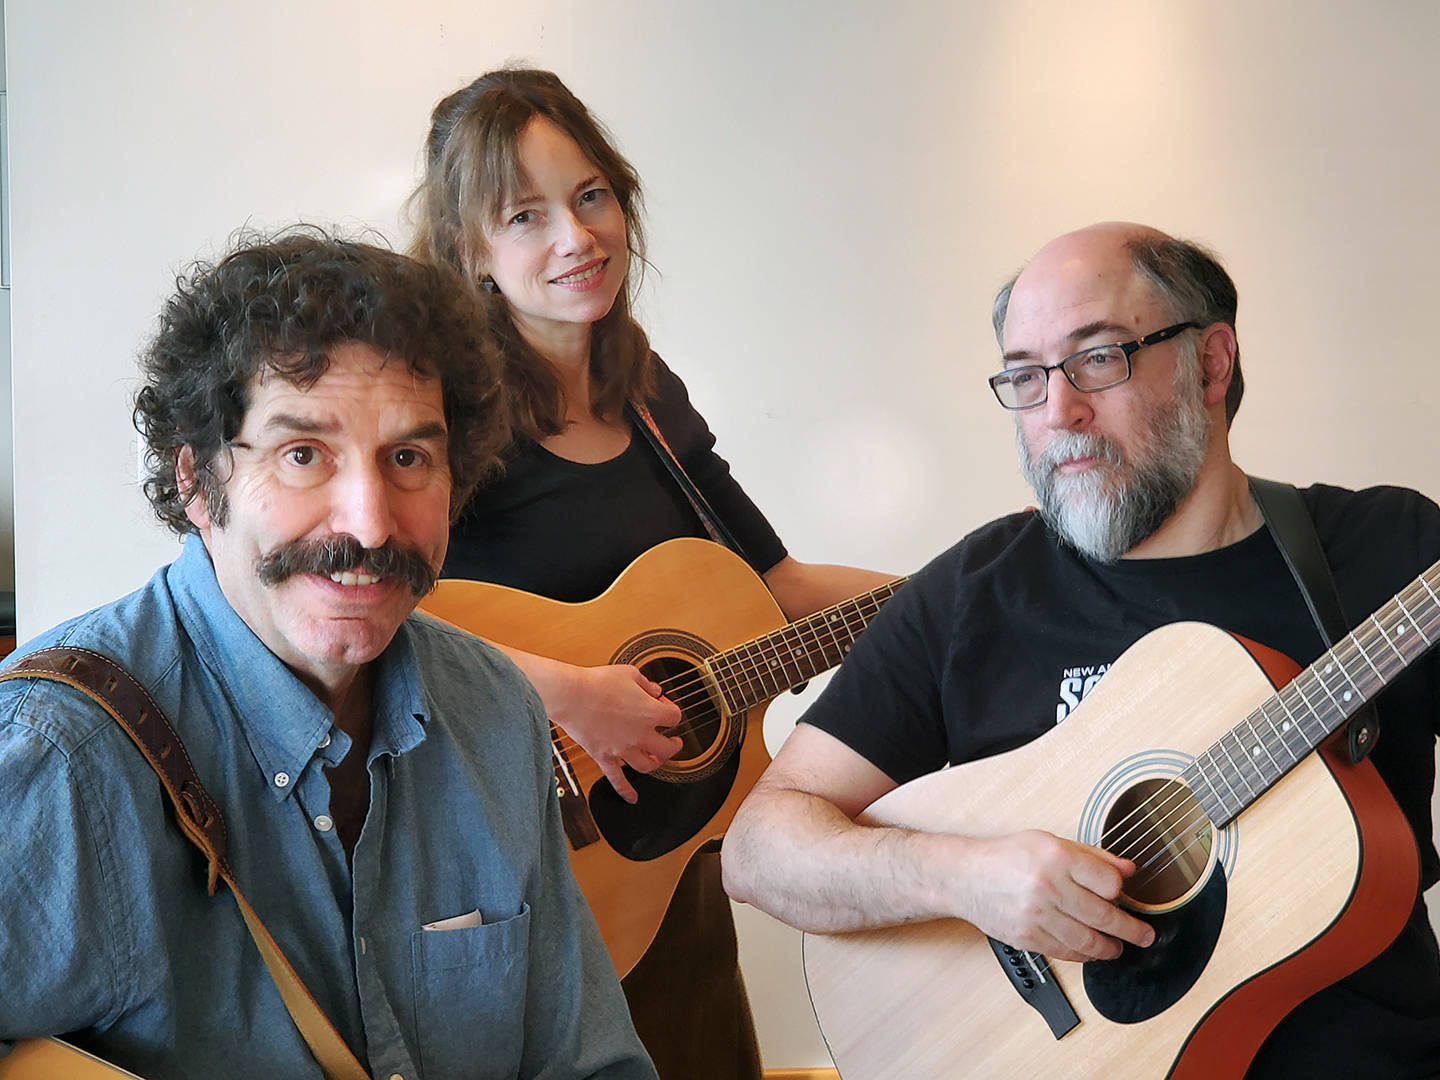 Courtesy Photo | John Clough                                 John Clough (Jim Croce), Summer Koester (Ingrid Croce) and Rob Cohen (Maury Muehleisen) hold guitars. All three will play characters inspired by real-life performers in the upcoming “Photographs & Memories: The Lives and Music of Jim & Ingrid Croce.”